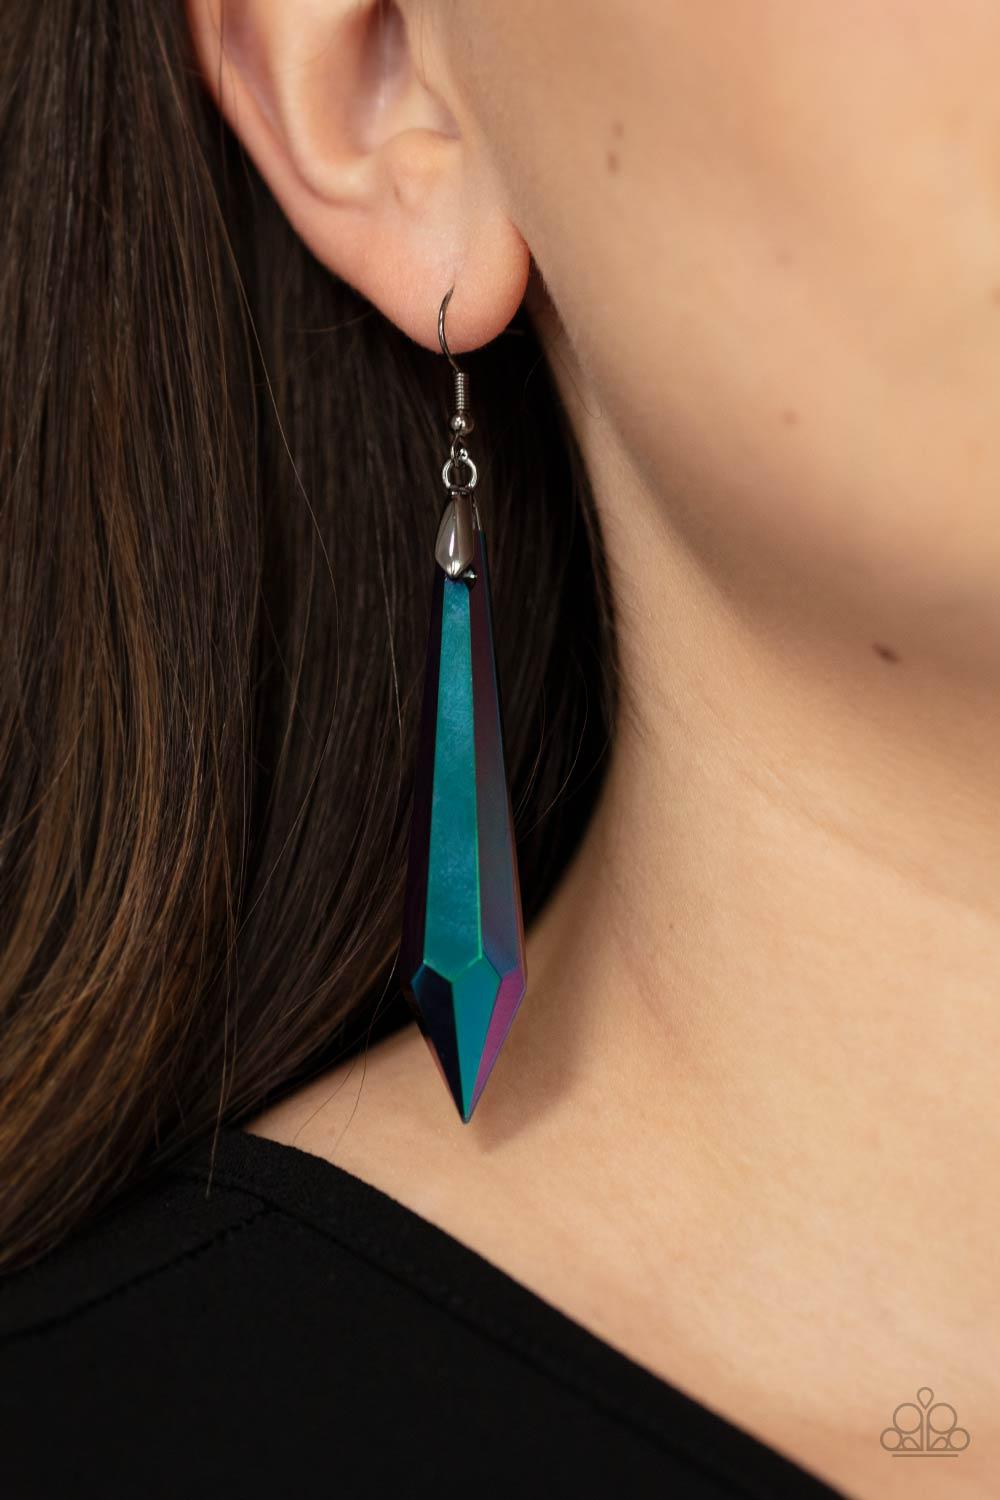 Paparazzi Accessories Sharp Dressed DIVA - Multi Featuring a stellar oil spill finish, a dramatically elongated gem attaches to a gunmetal fitting that swings from the ear for a hypnotizing fashion. Earring attaches to a standard fishhook fitting. Sold as